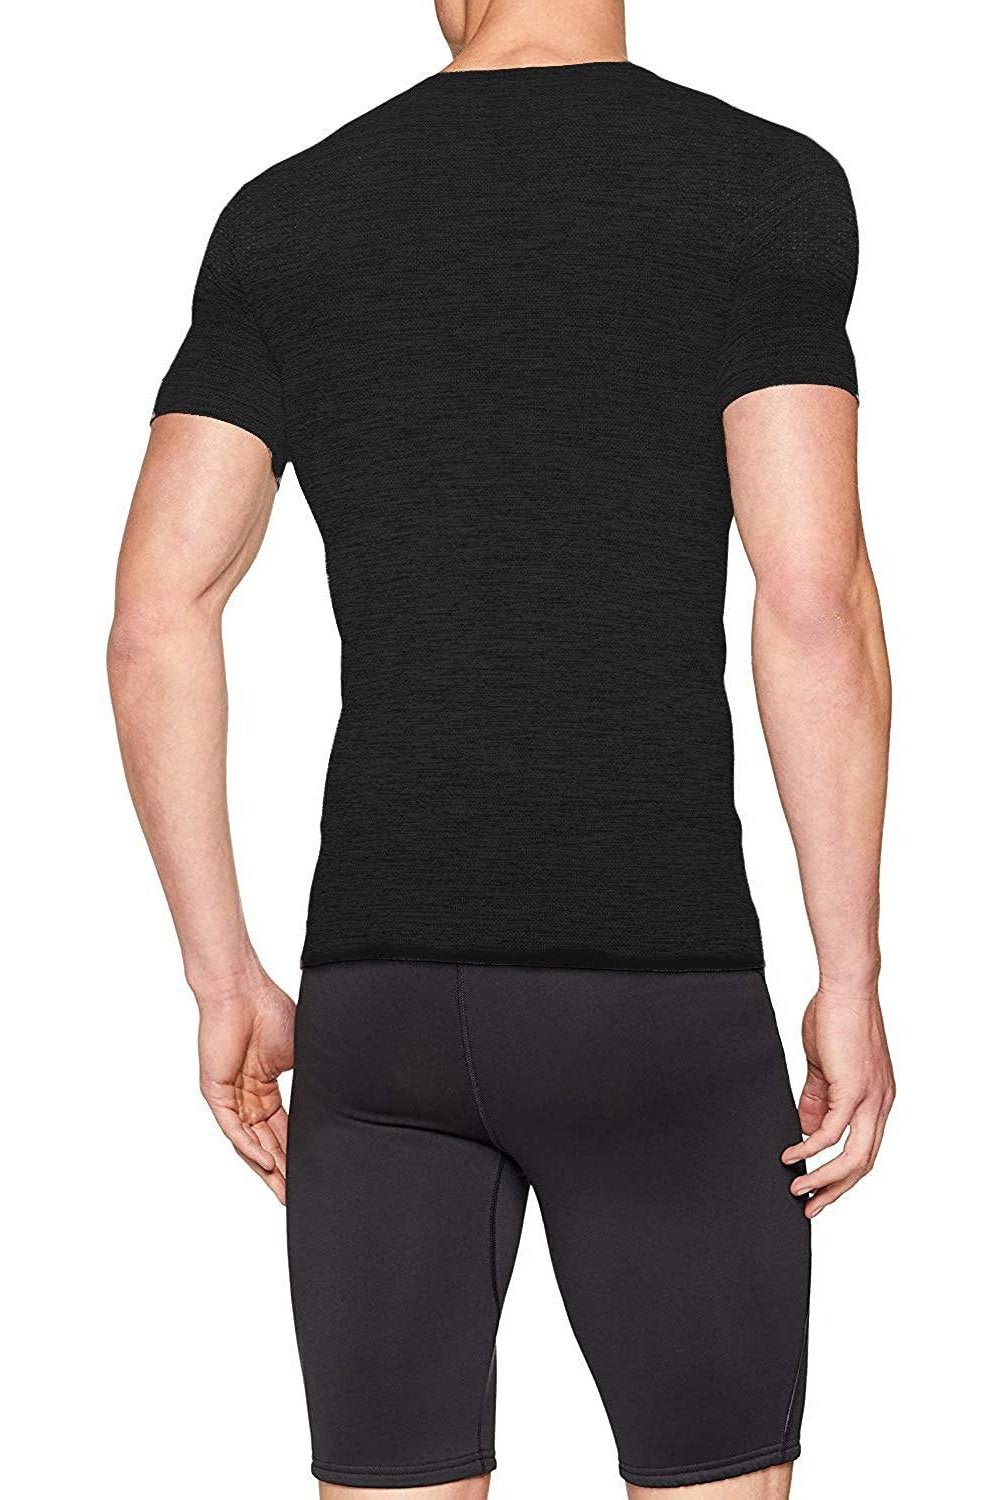 Sundried Albaron Men's Muscle Fit T-Shirt T-Shirt Activewear